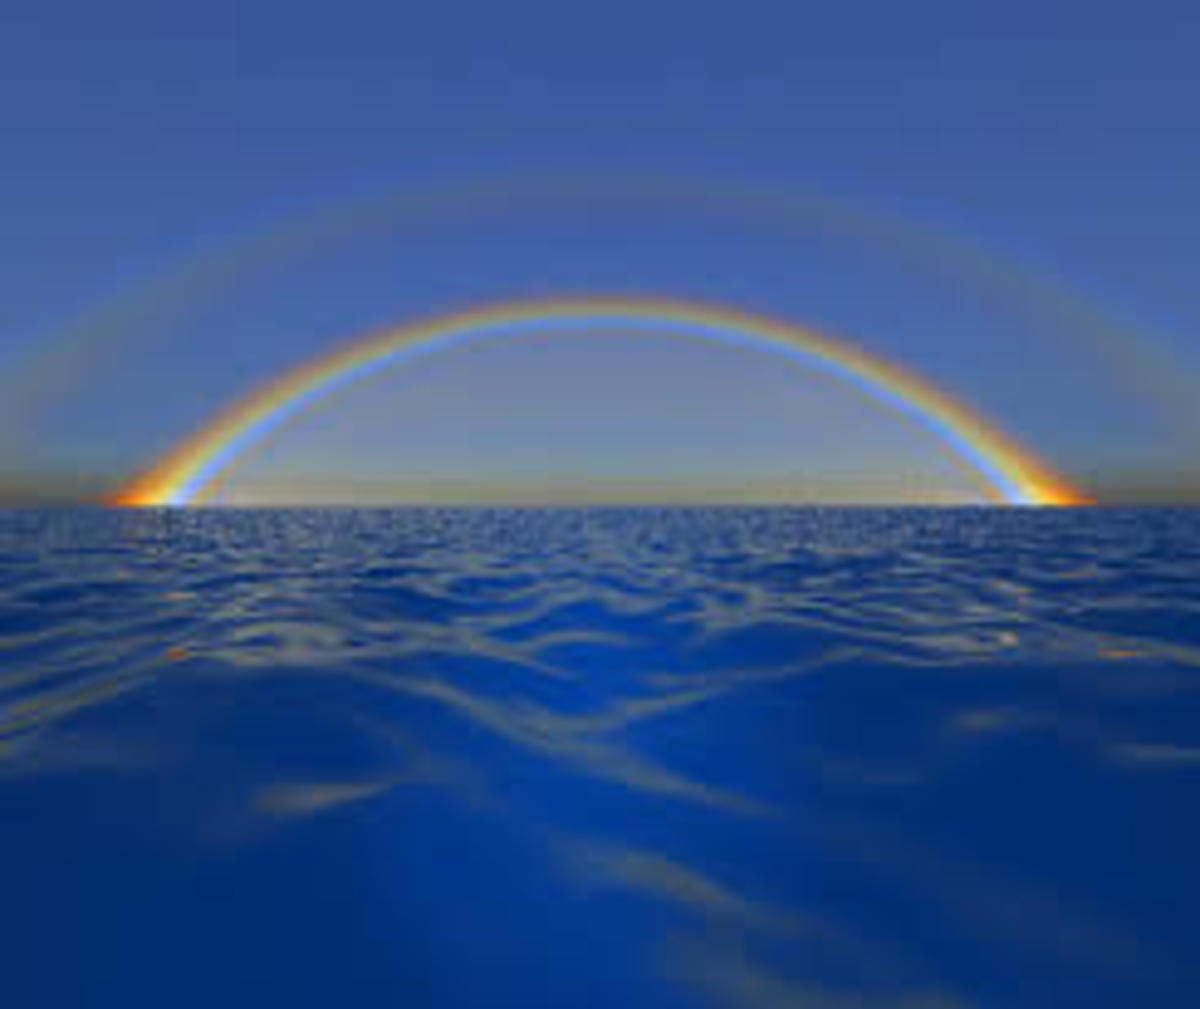 God's sign to all generations that He will not destroy the earth as promised in Genesis 9.